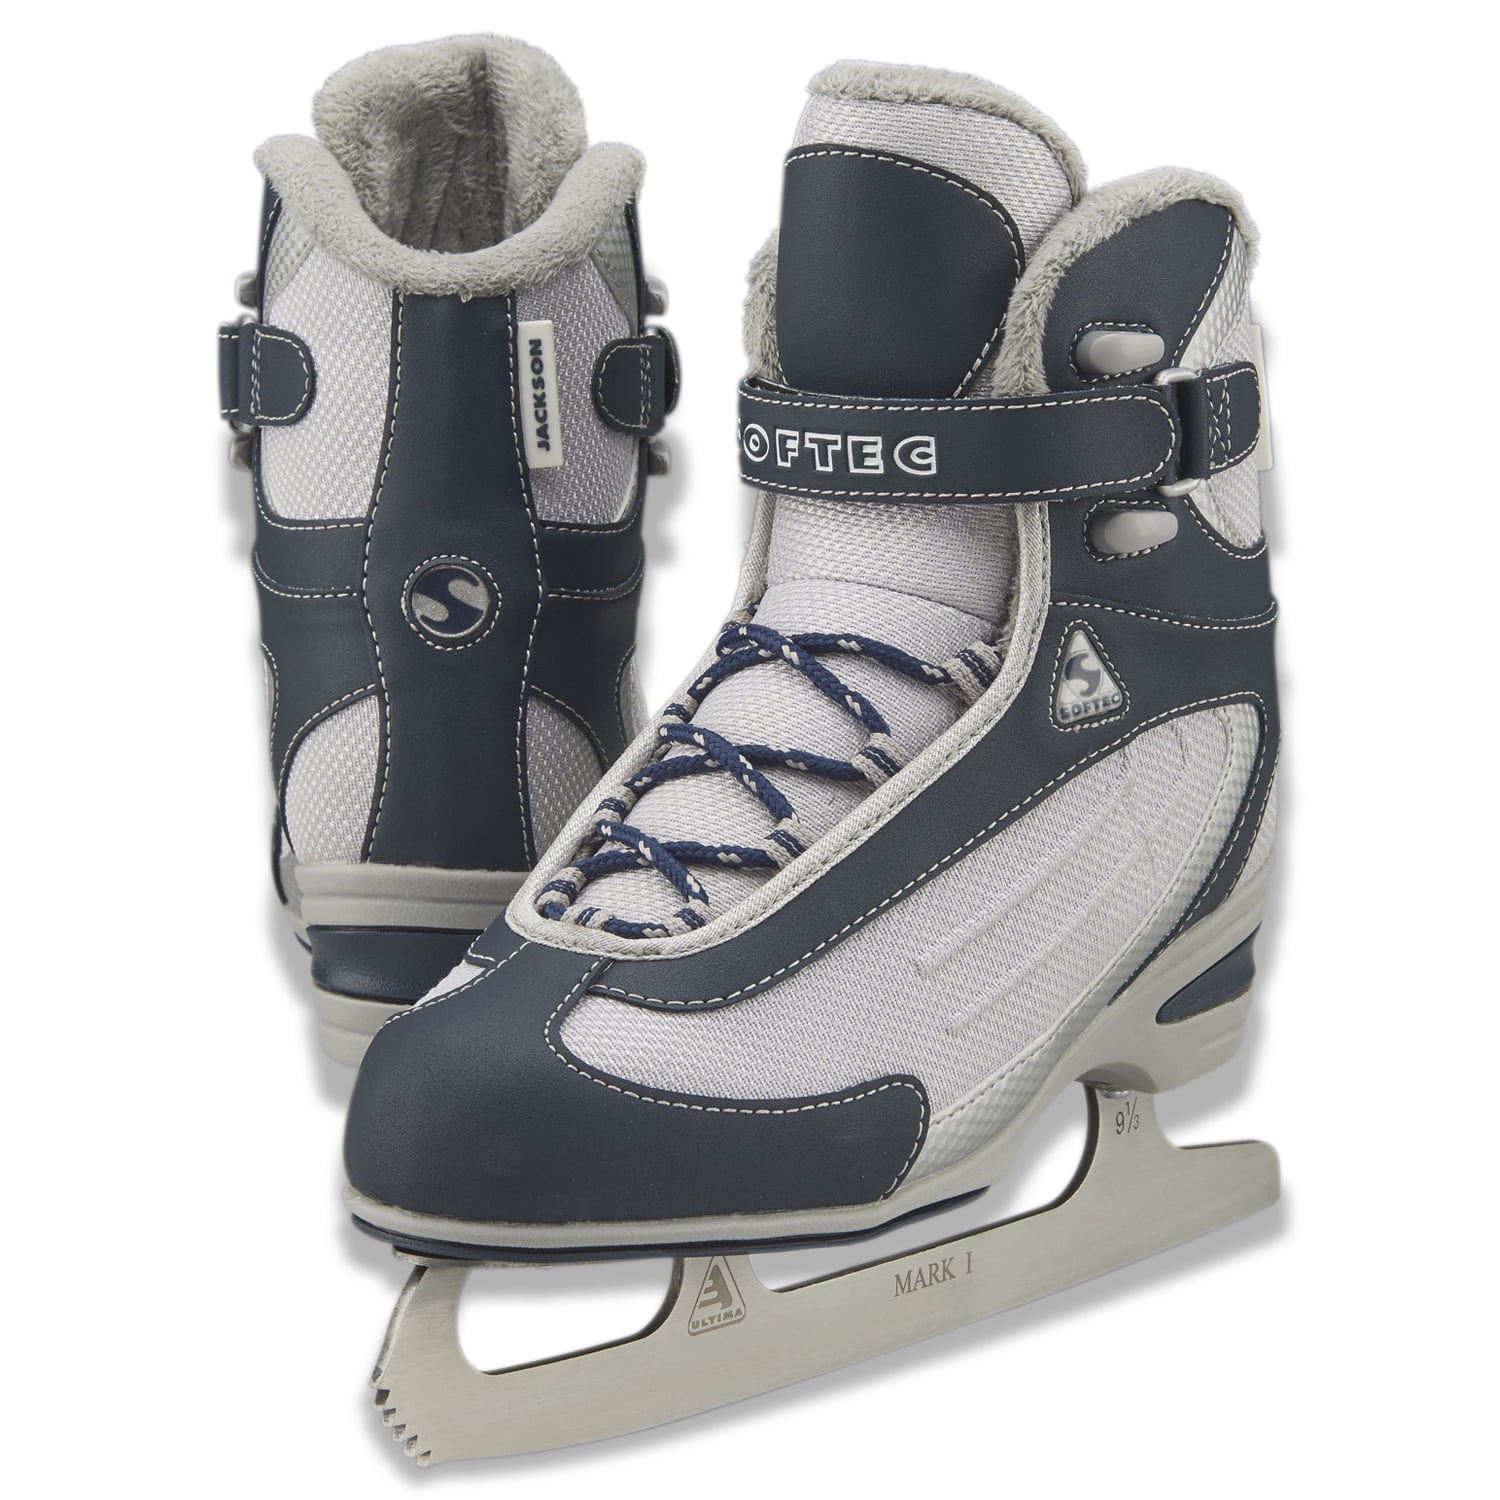 show original title Details about   Ice Hockey Skates Protective Black Ice Skating Runners Saver Skate Protection 